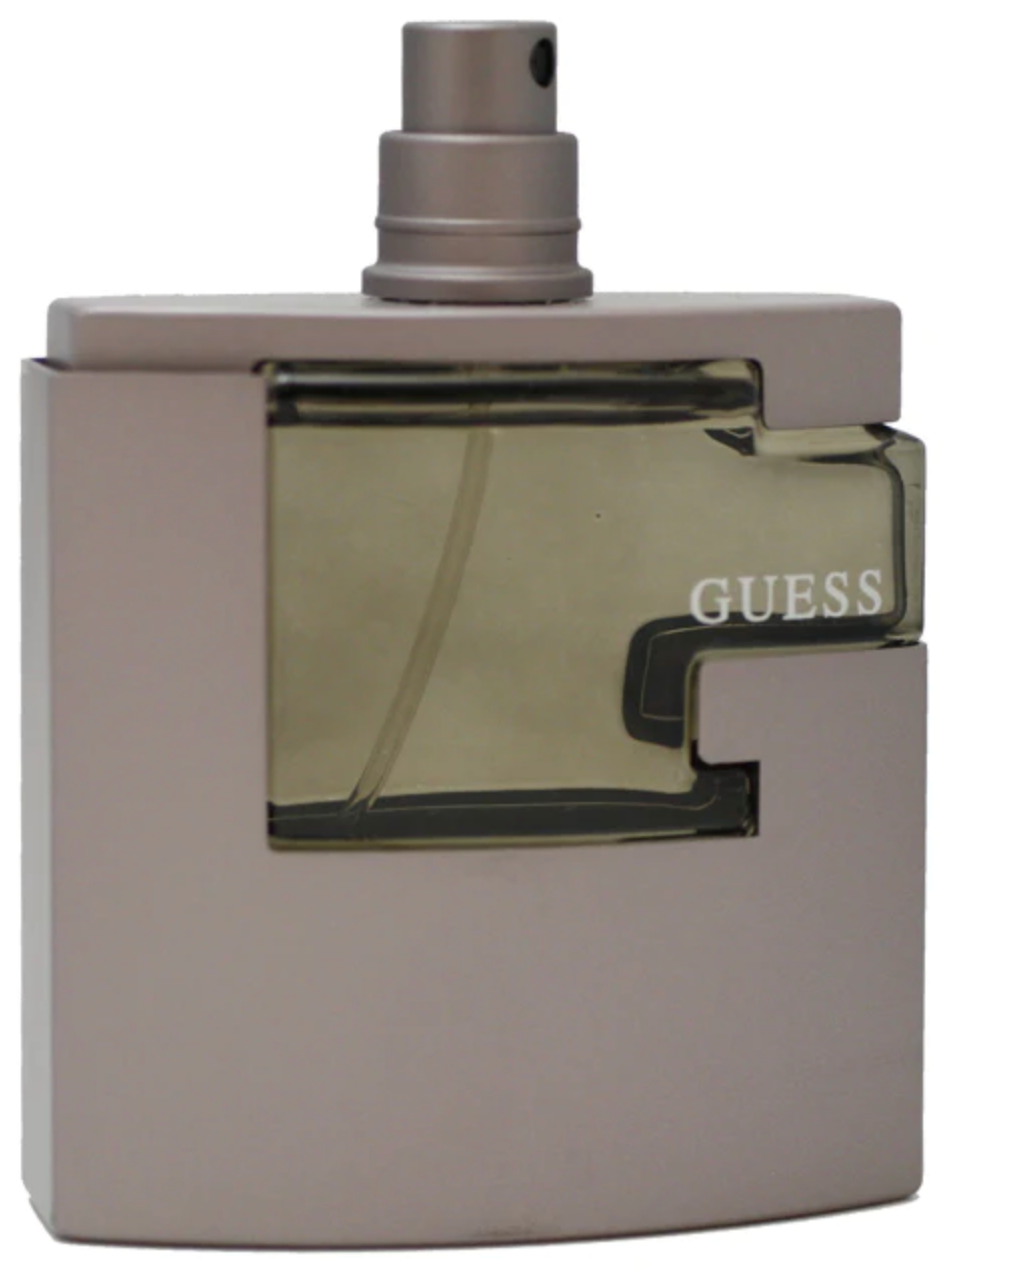 Guess Suede Cologne Sample